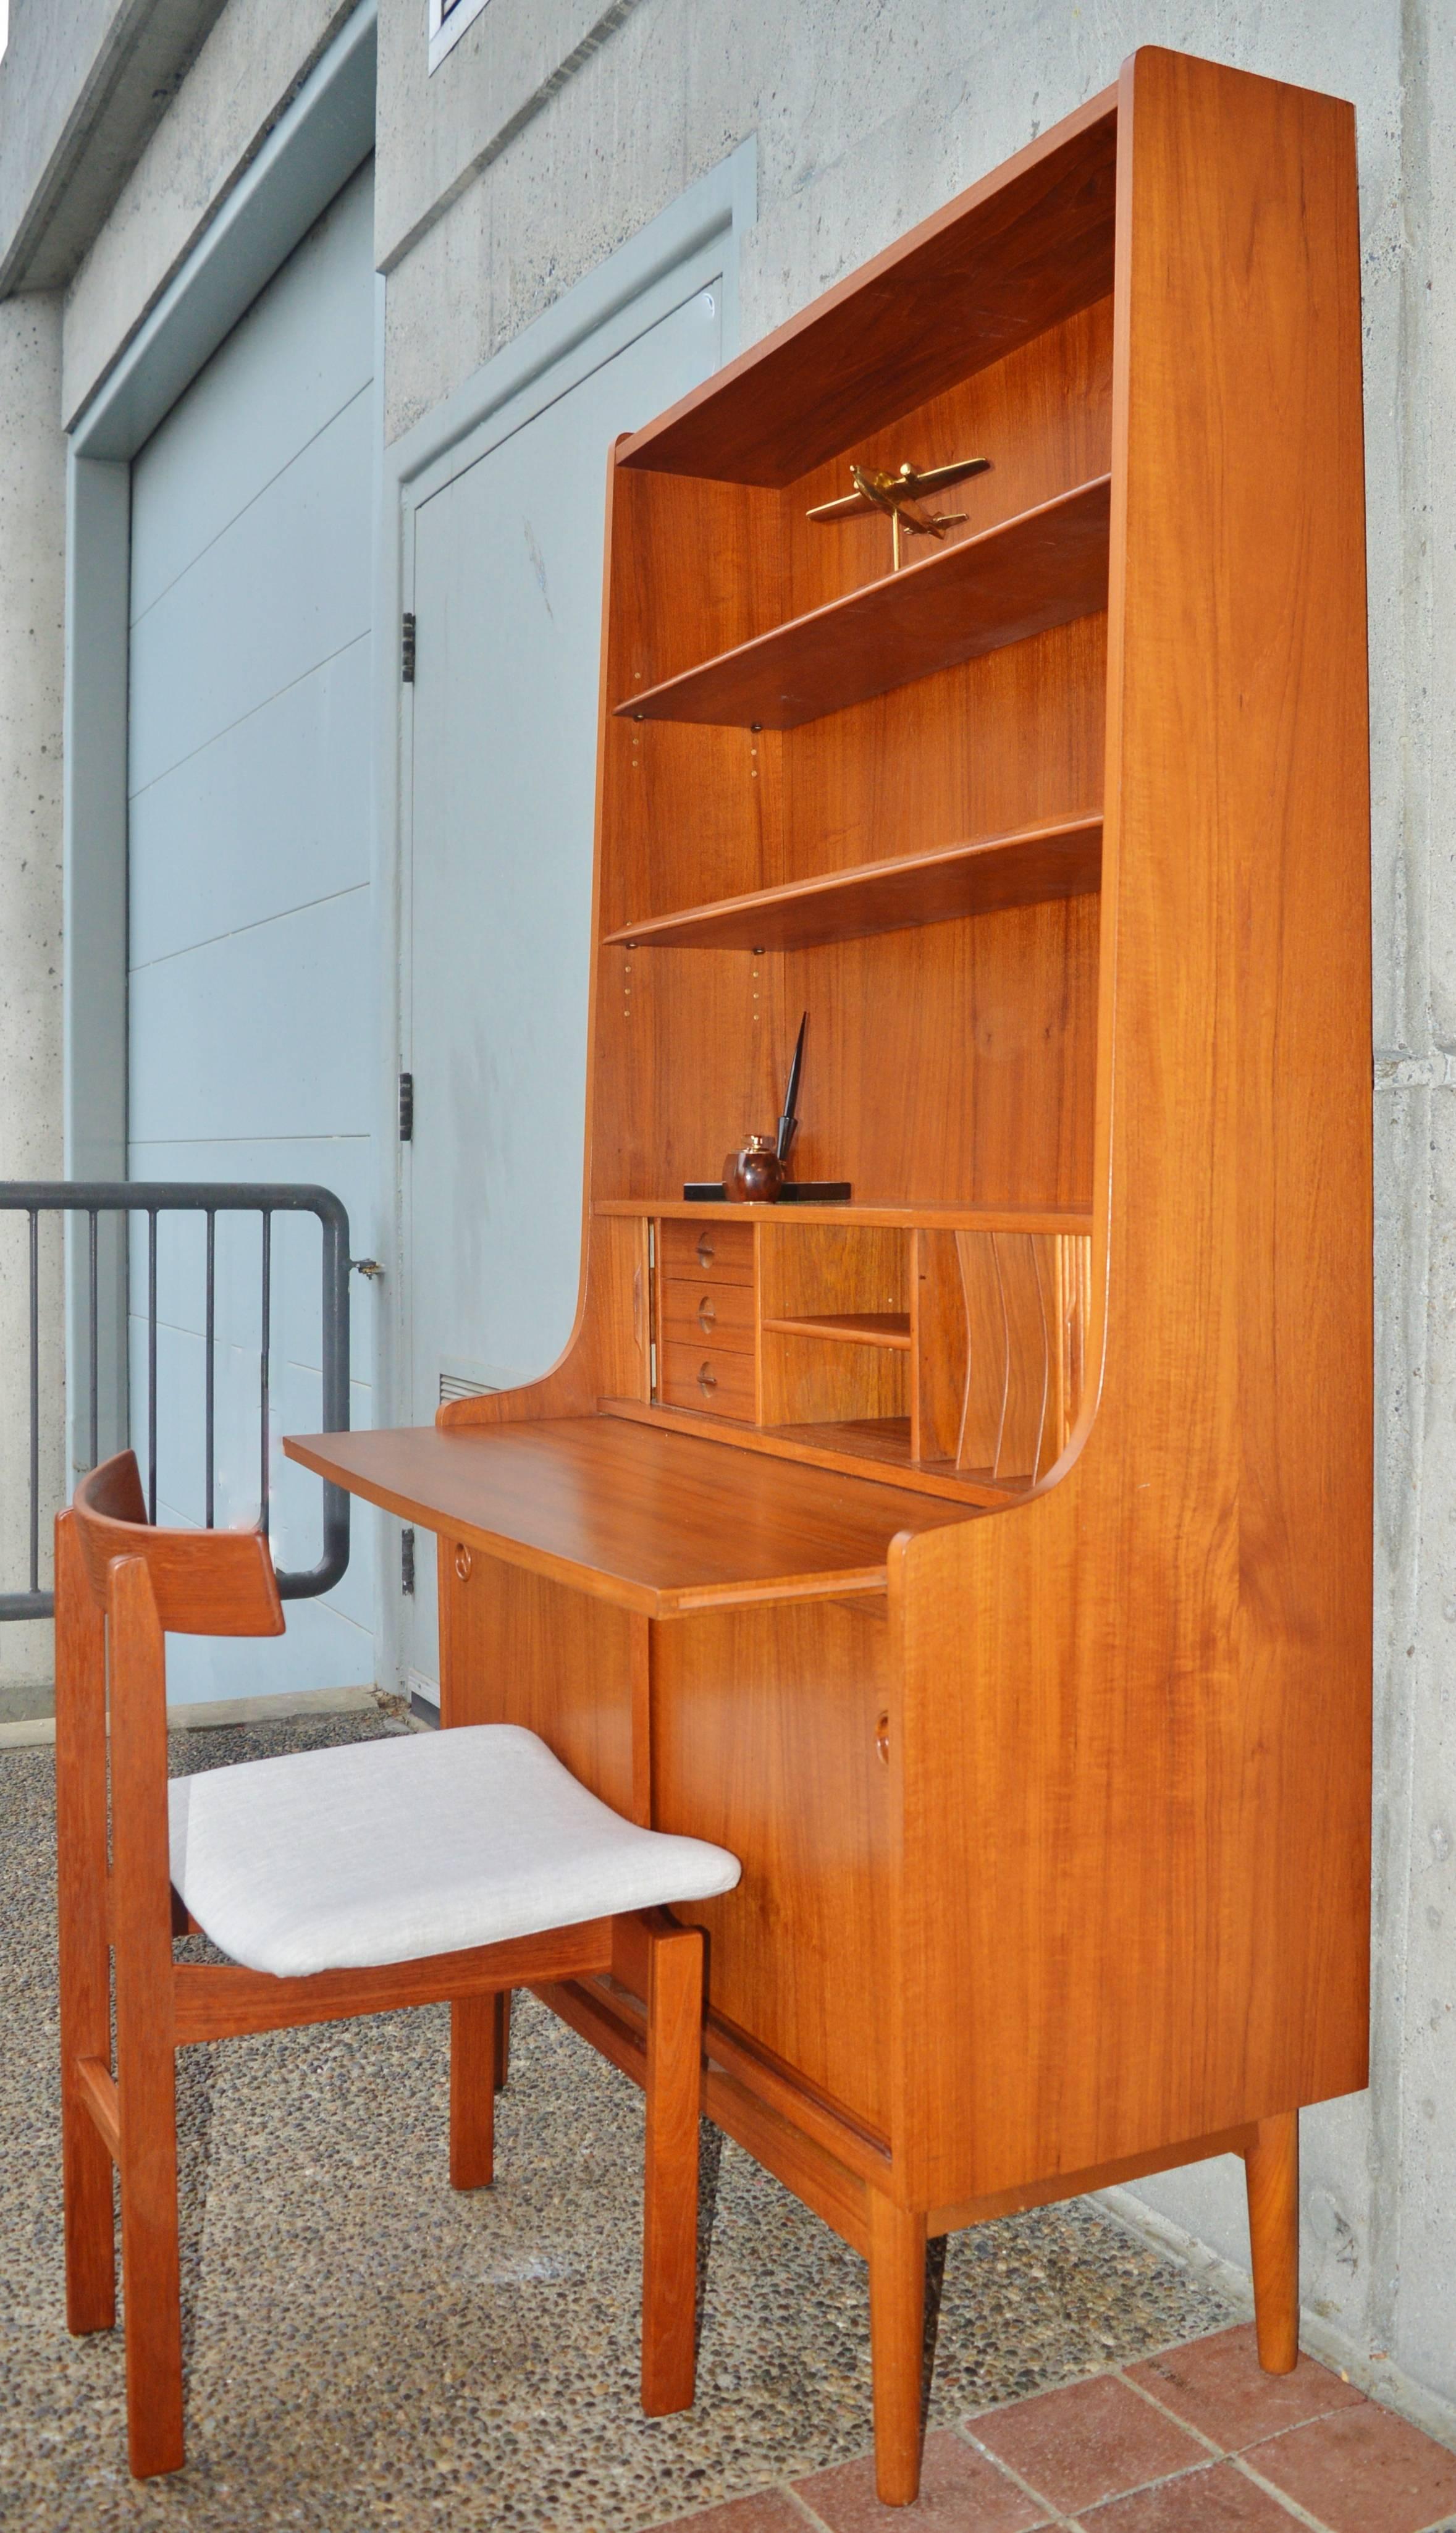 This stellar quality all hardwood constructed teak secretary / bookcase by acclaimed Danish designer, Borge Mogensen, is just gorgeous! Featuring a central tambour door that opens to reveal 3 tiny drawers with crossed circle pulls and various pigeon